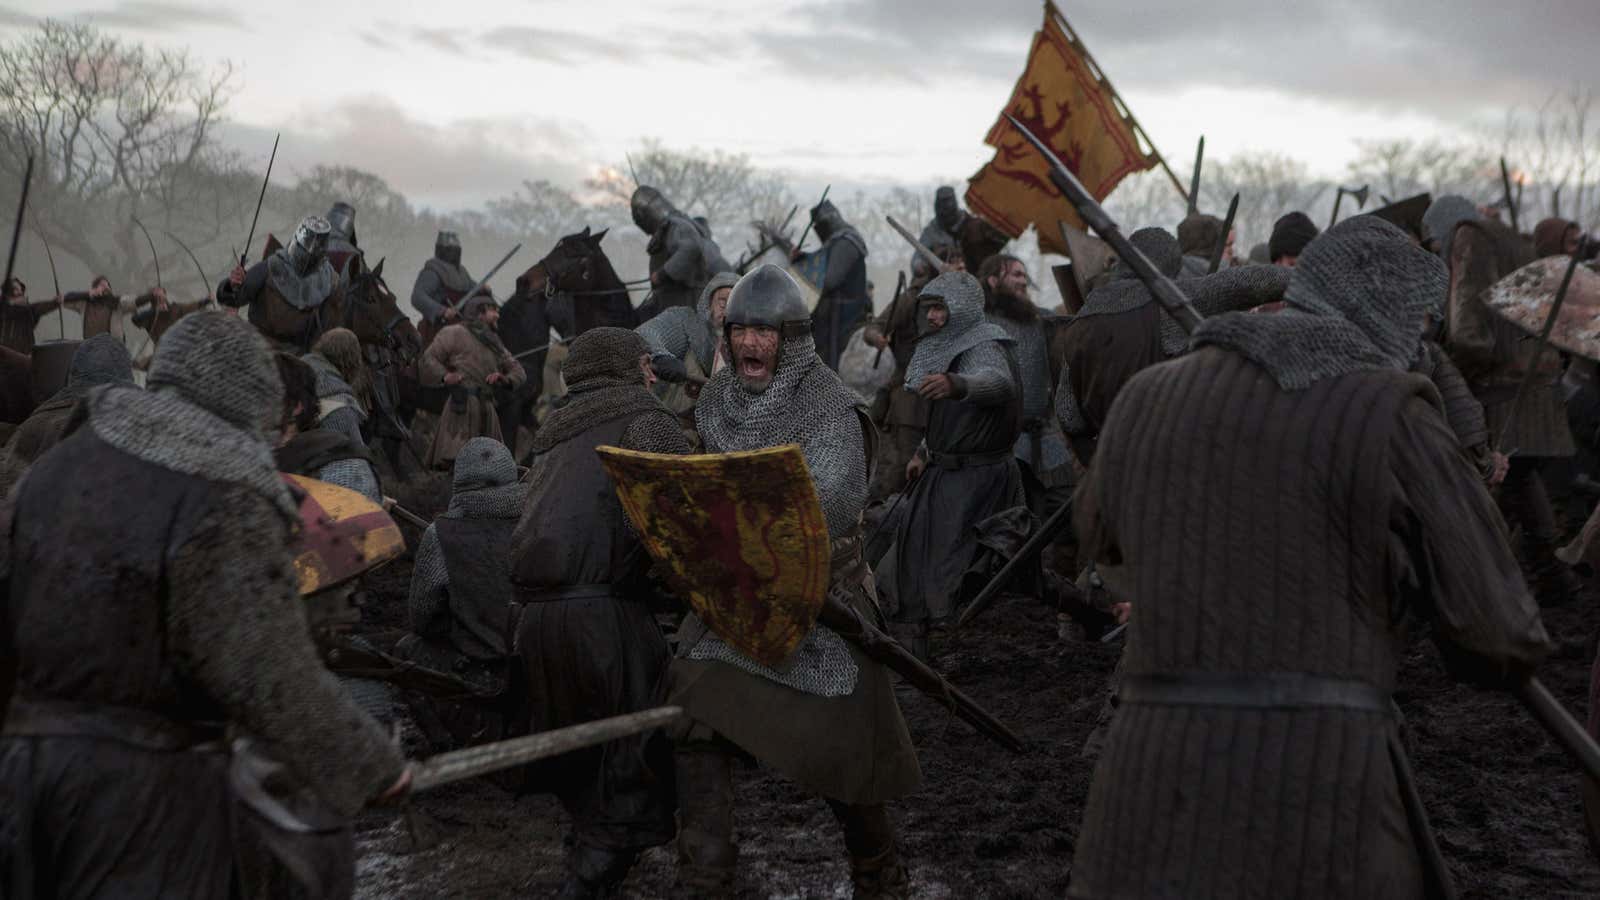 “Outlaw King” was a big production, even by Netflix standards.